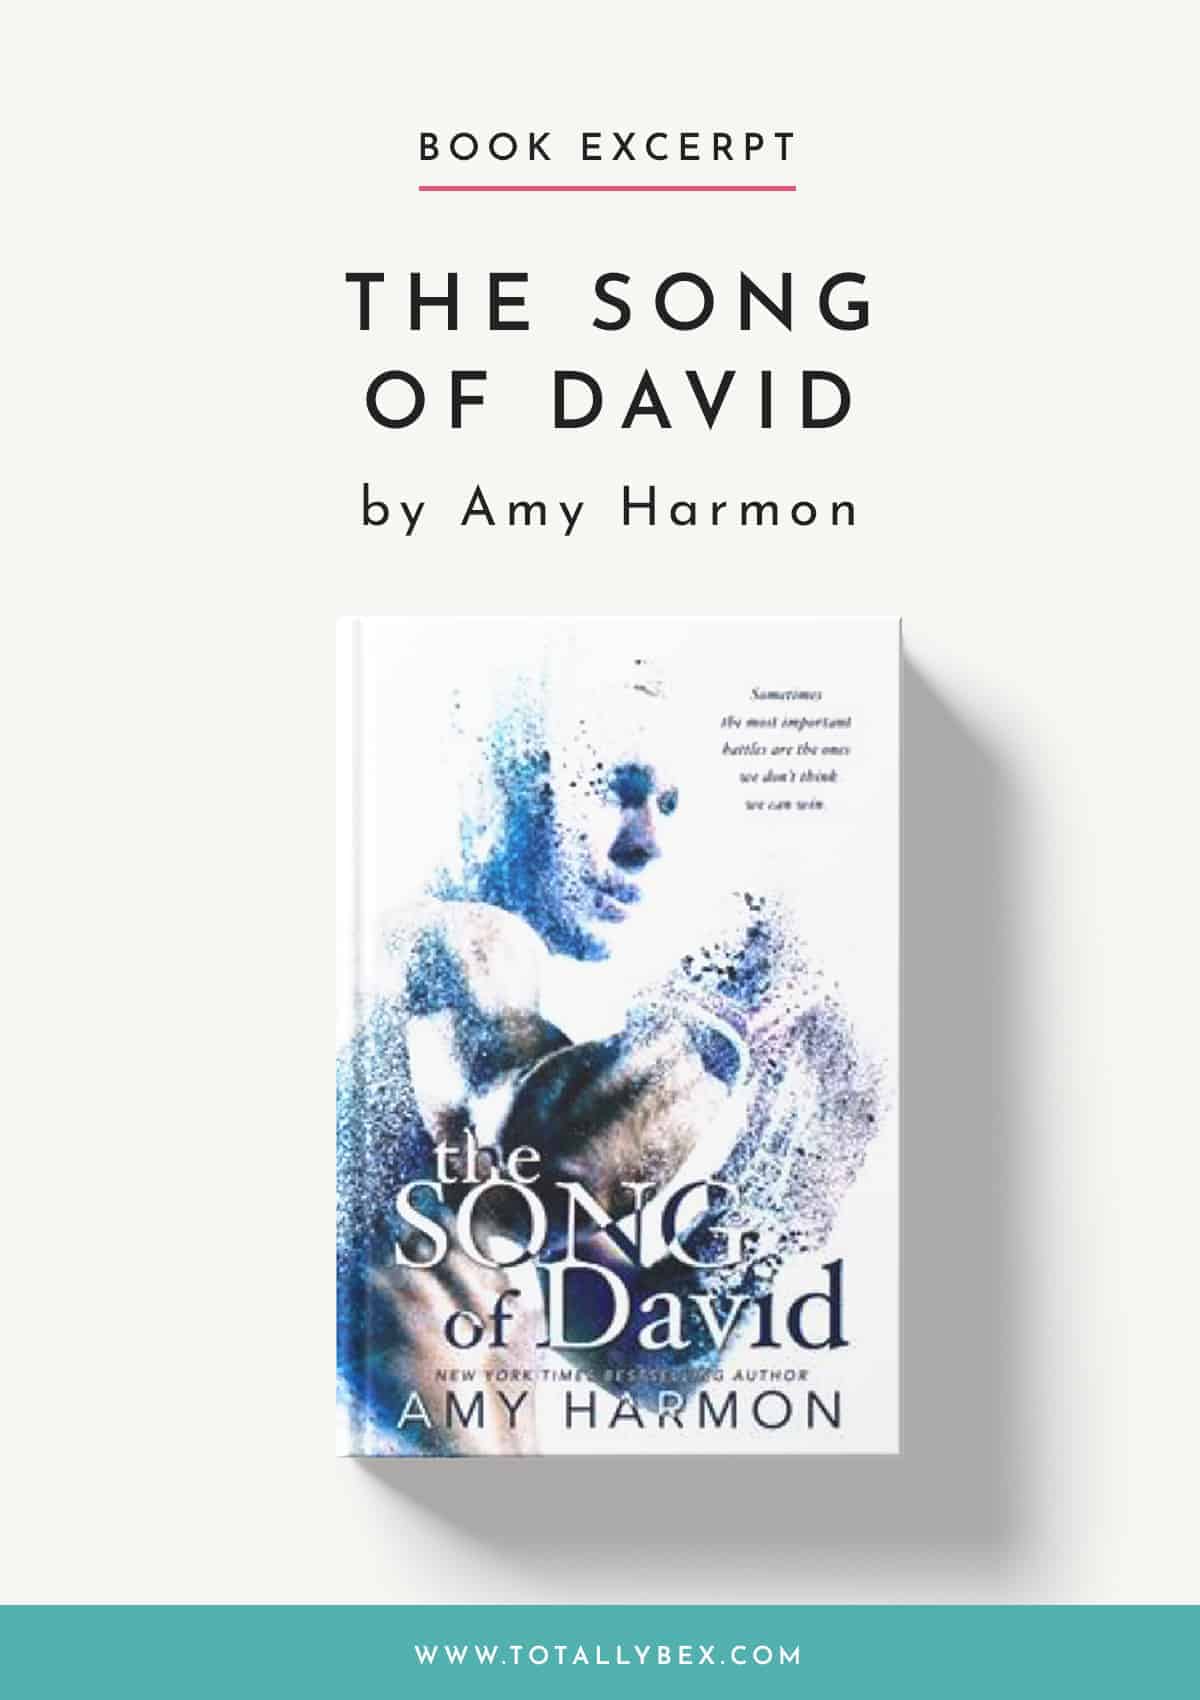 The Song of David by Amy Harmon – Read an Excerpt!